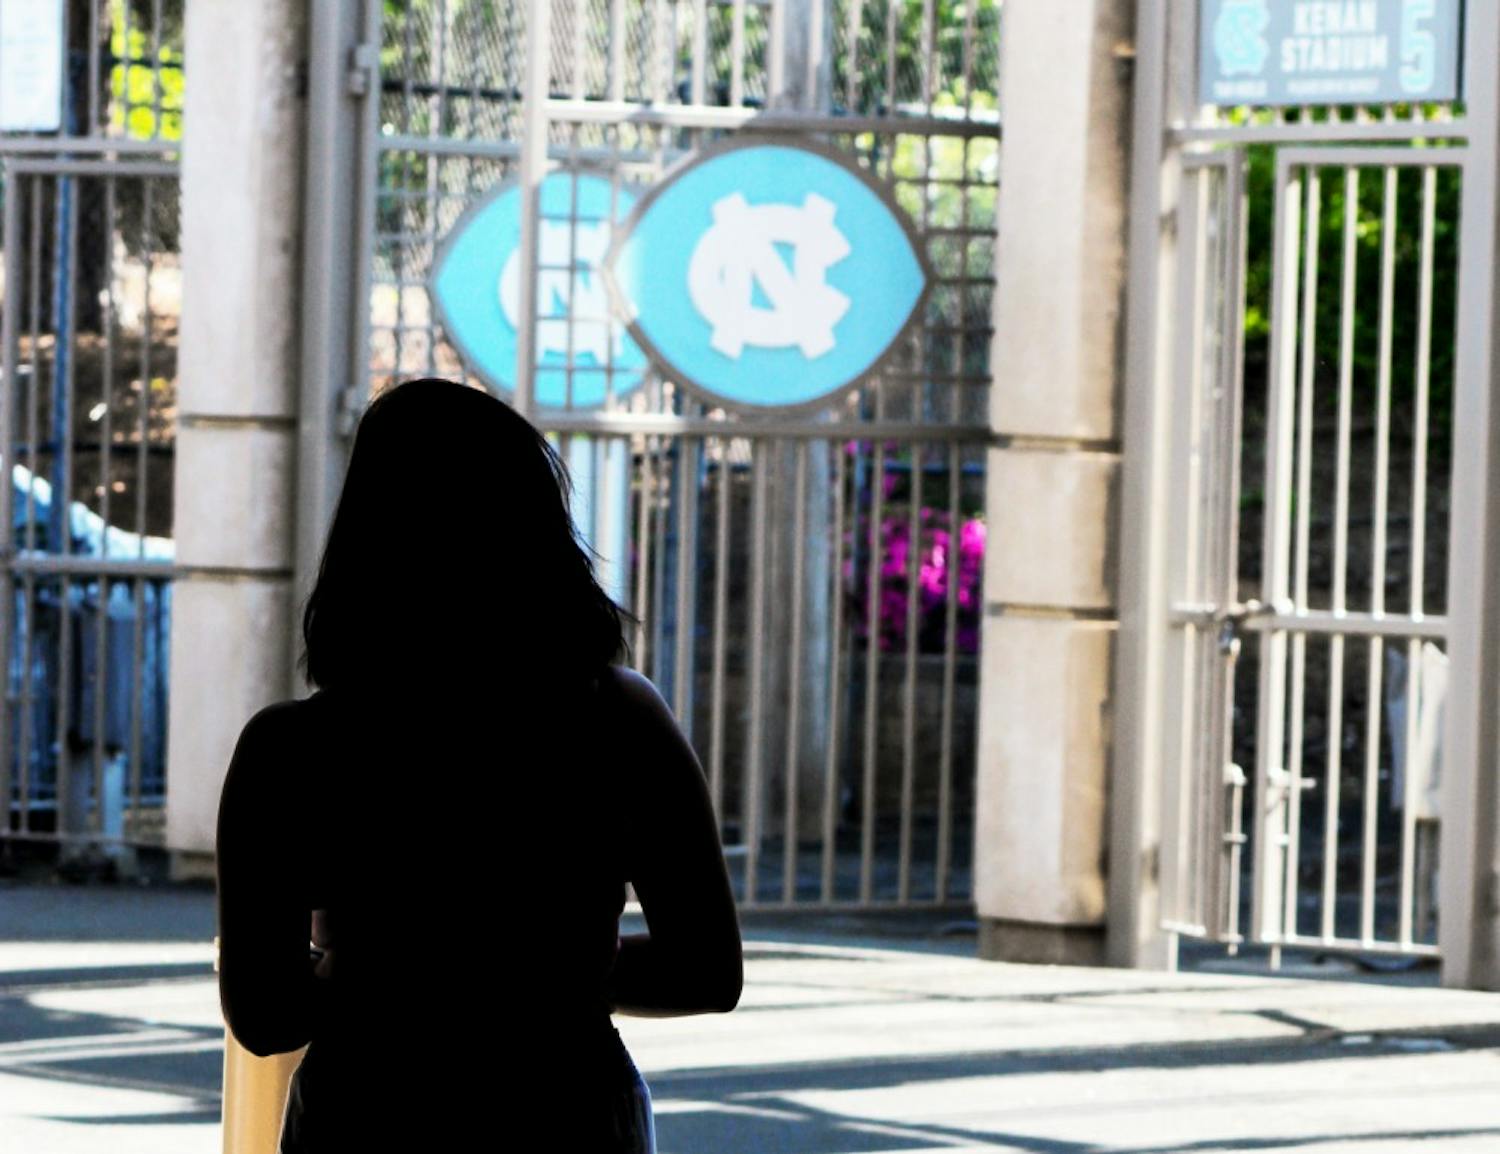 According to UNC student responses to the AAU survey, over 68 percent of students who reported being sexually assaulted in any manner said they never reported the assault because they thought it would be too difficult or embarrassing, or that it wasn’t serious enough.&nbsp;
Clarification: This photo was taken at Kenan Stadium to show the UNC logo. The story does not involve the football team in any way. &nbsp;